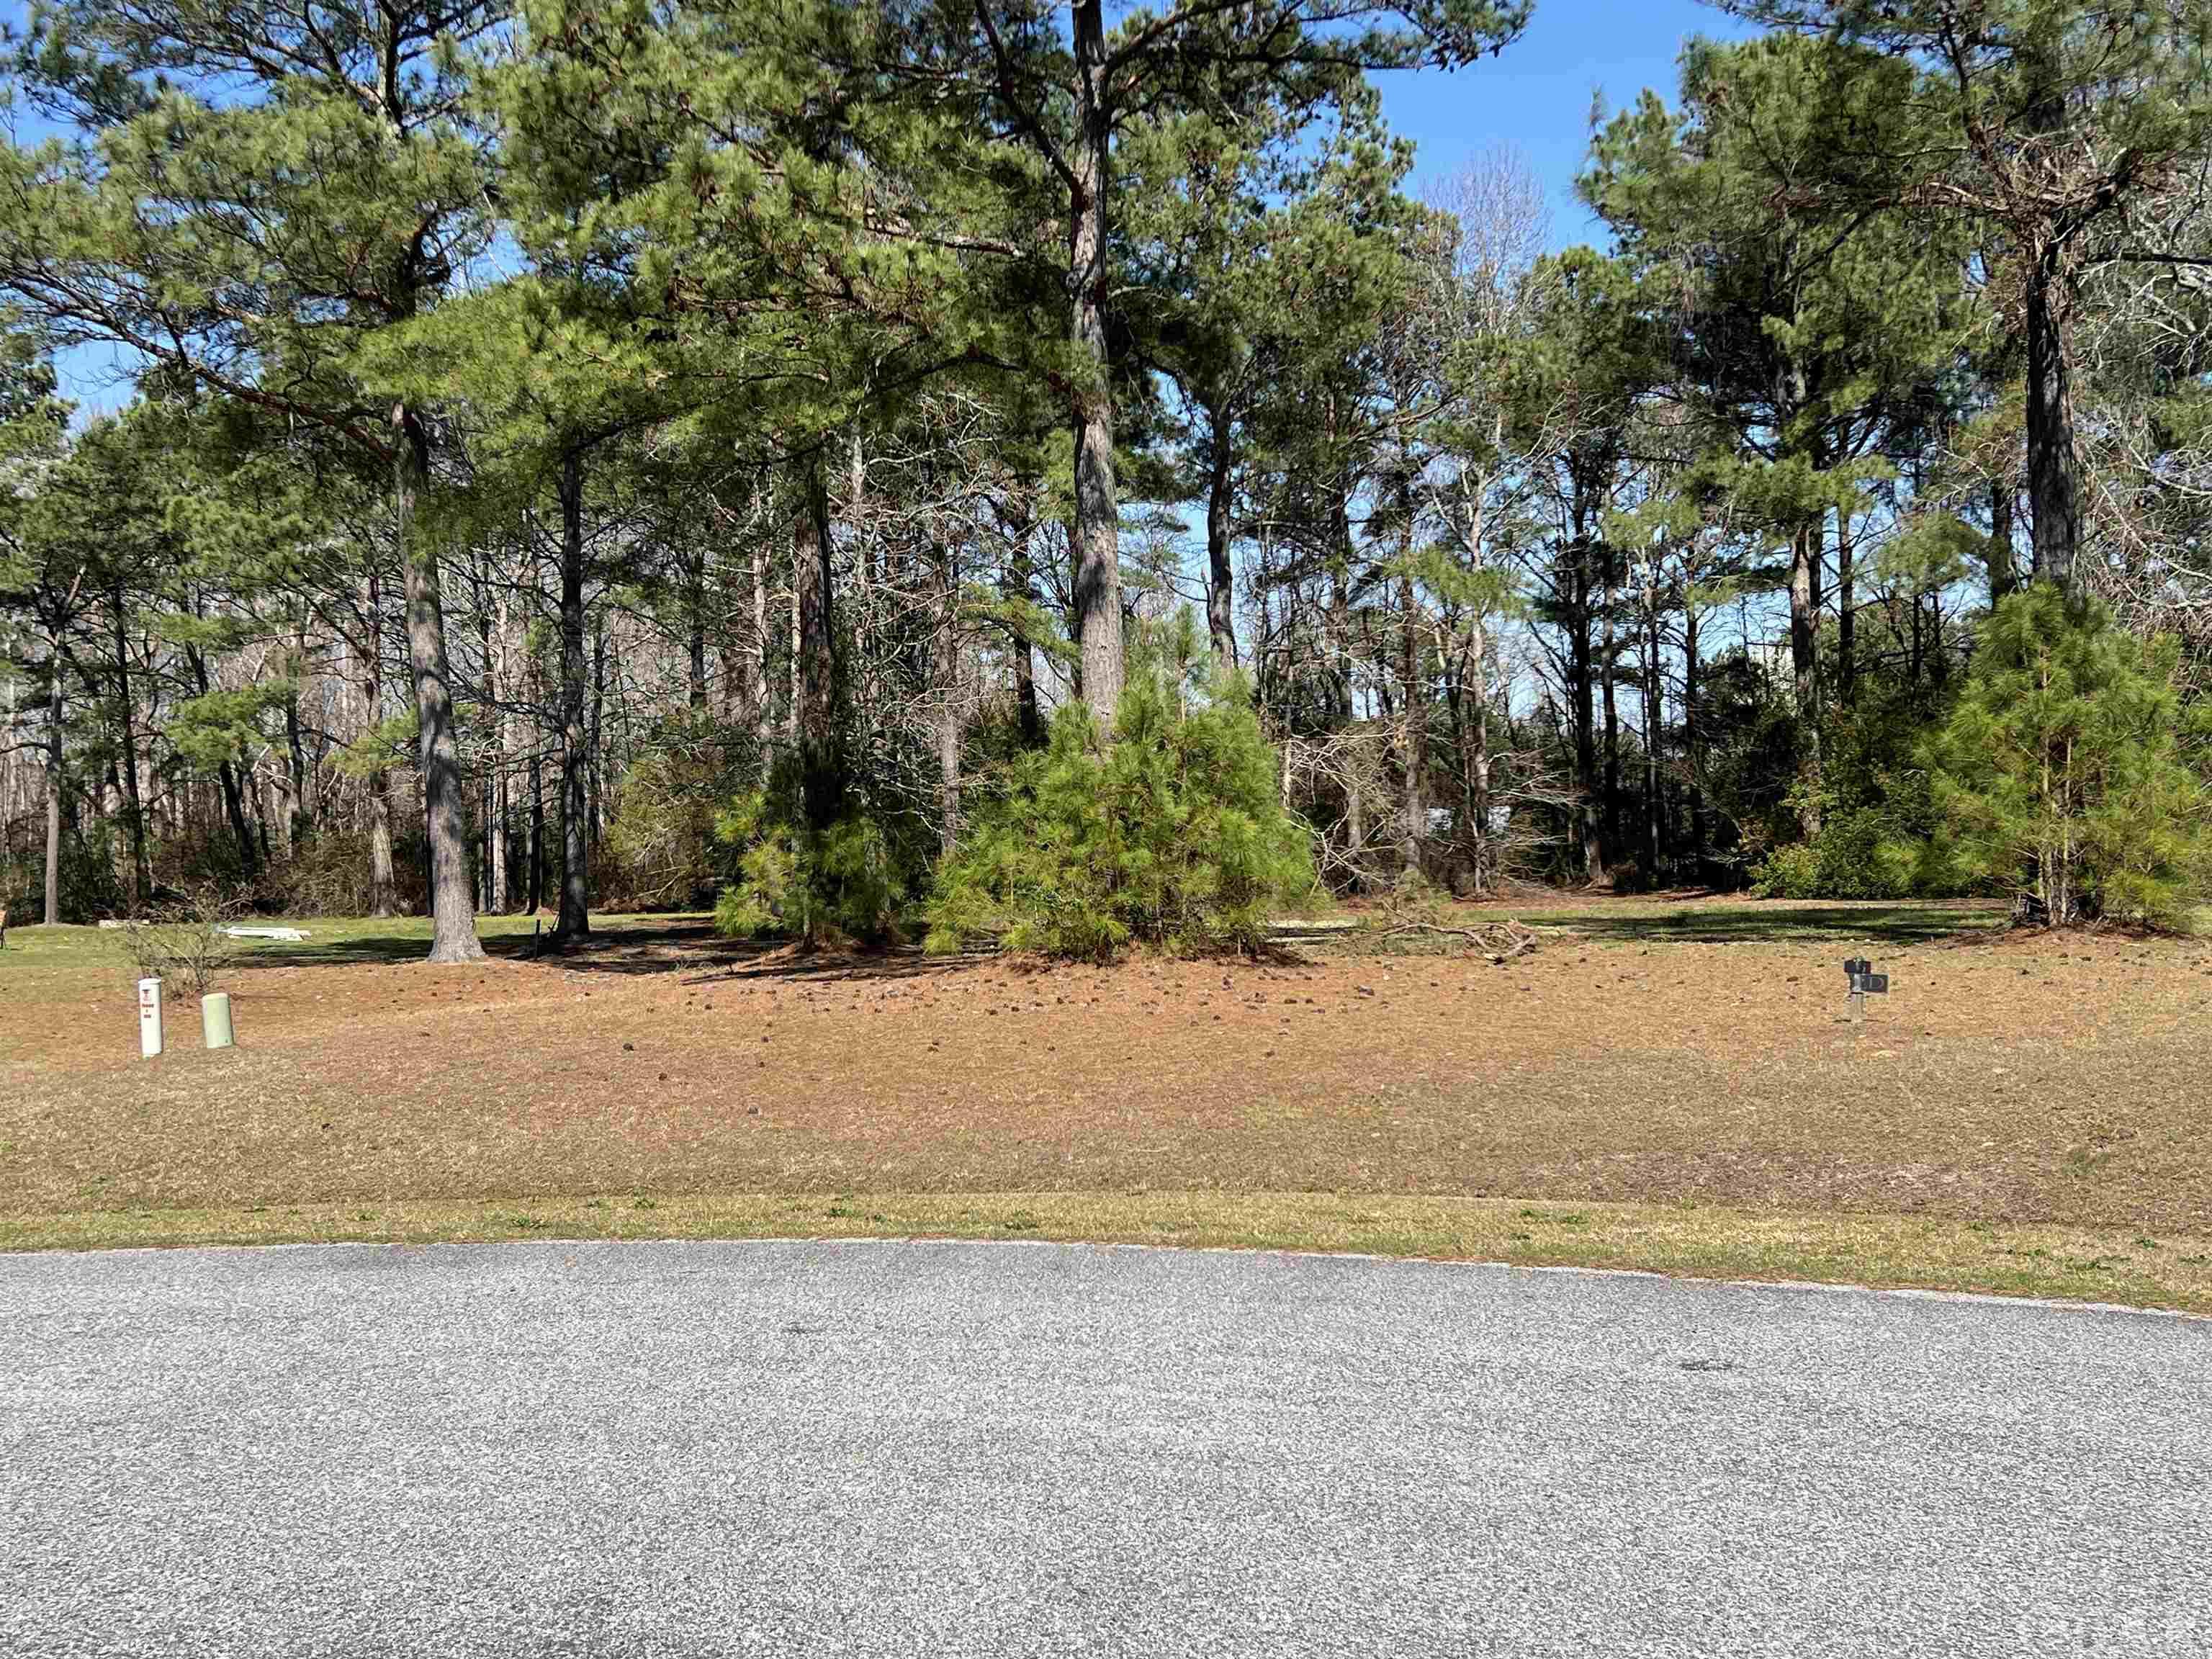 Looking for a quiet tranquil location to build that dream home! This spot could be it! Partially wooded, nearly 3/4 of an acre lot is located on a a quiet dead-end road. View the Currituck Sound from street, with a very short walk to the water. Just a few miles north of Grandy, 25 minutes from the Outer Banks and close proximity to Virginia. Don't miss out on this one!